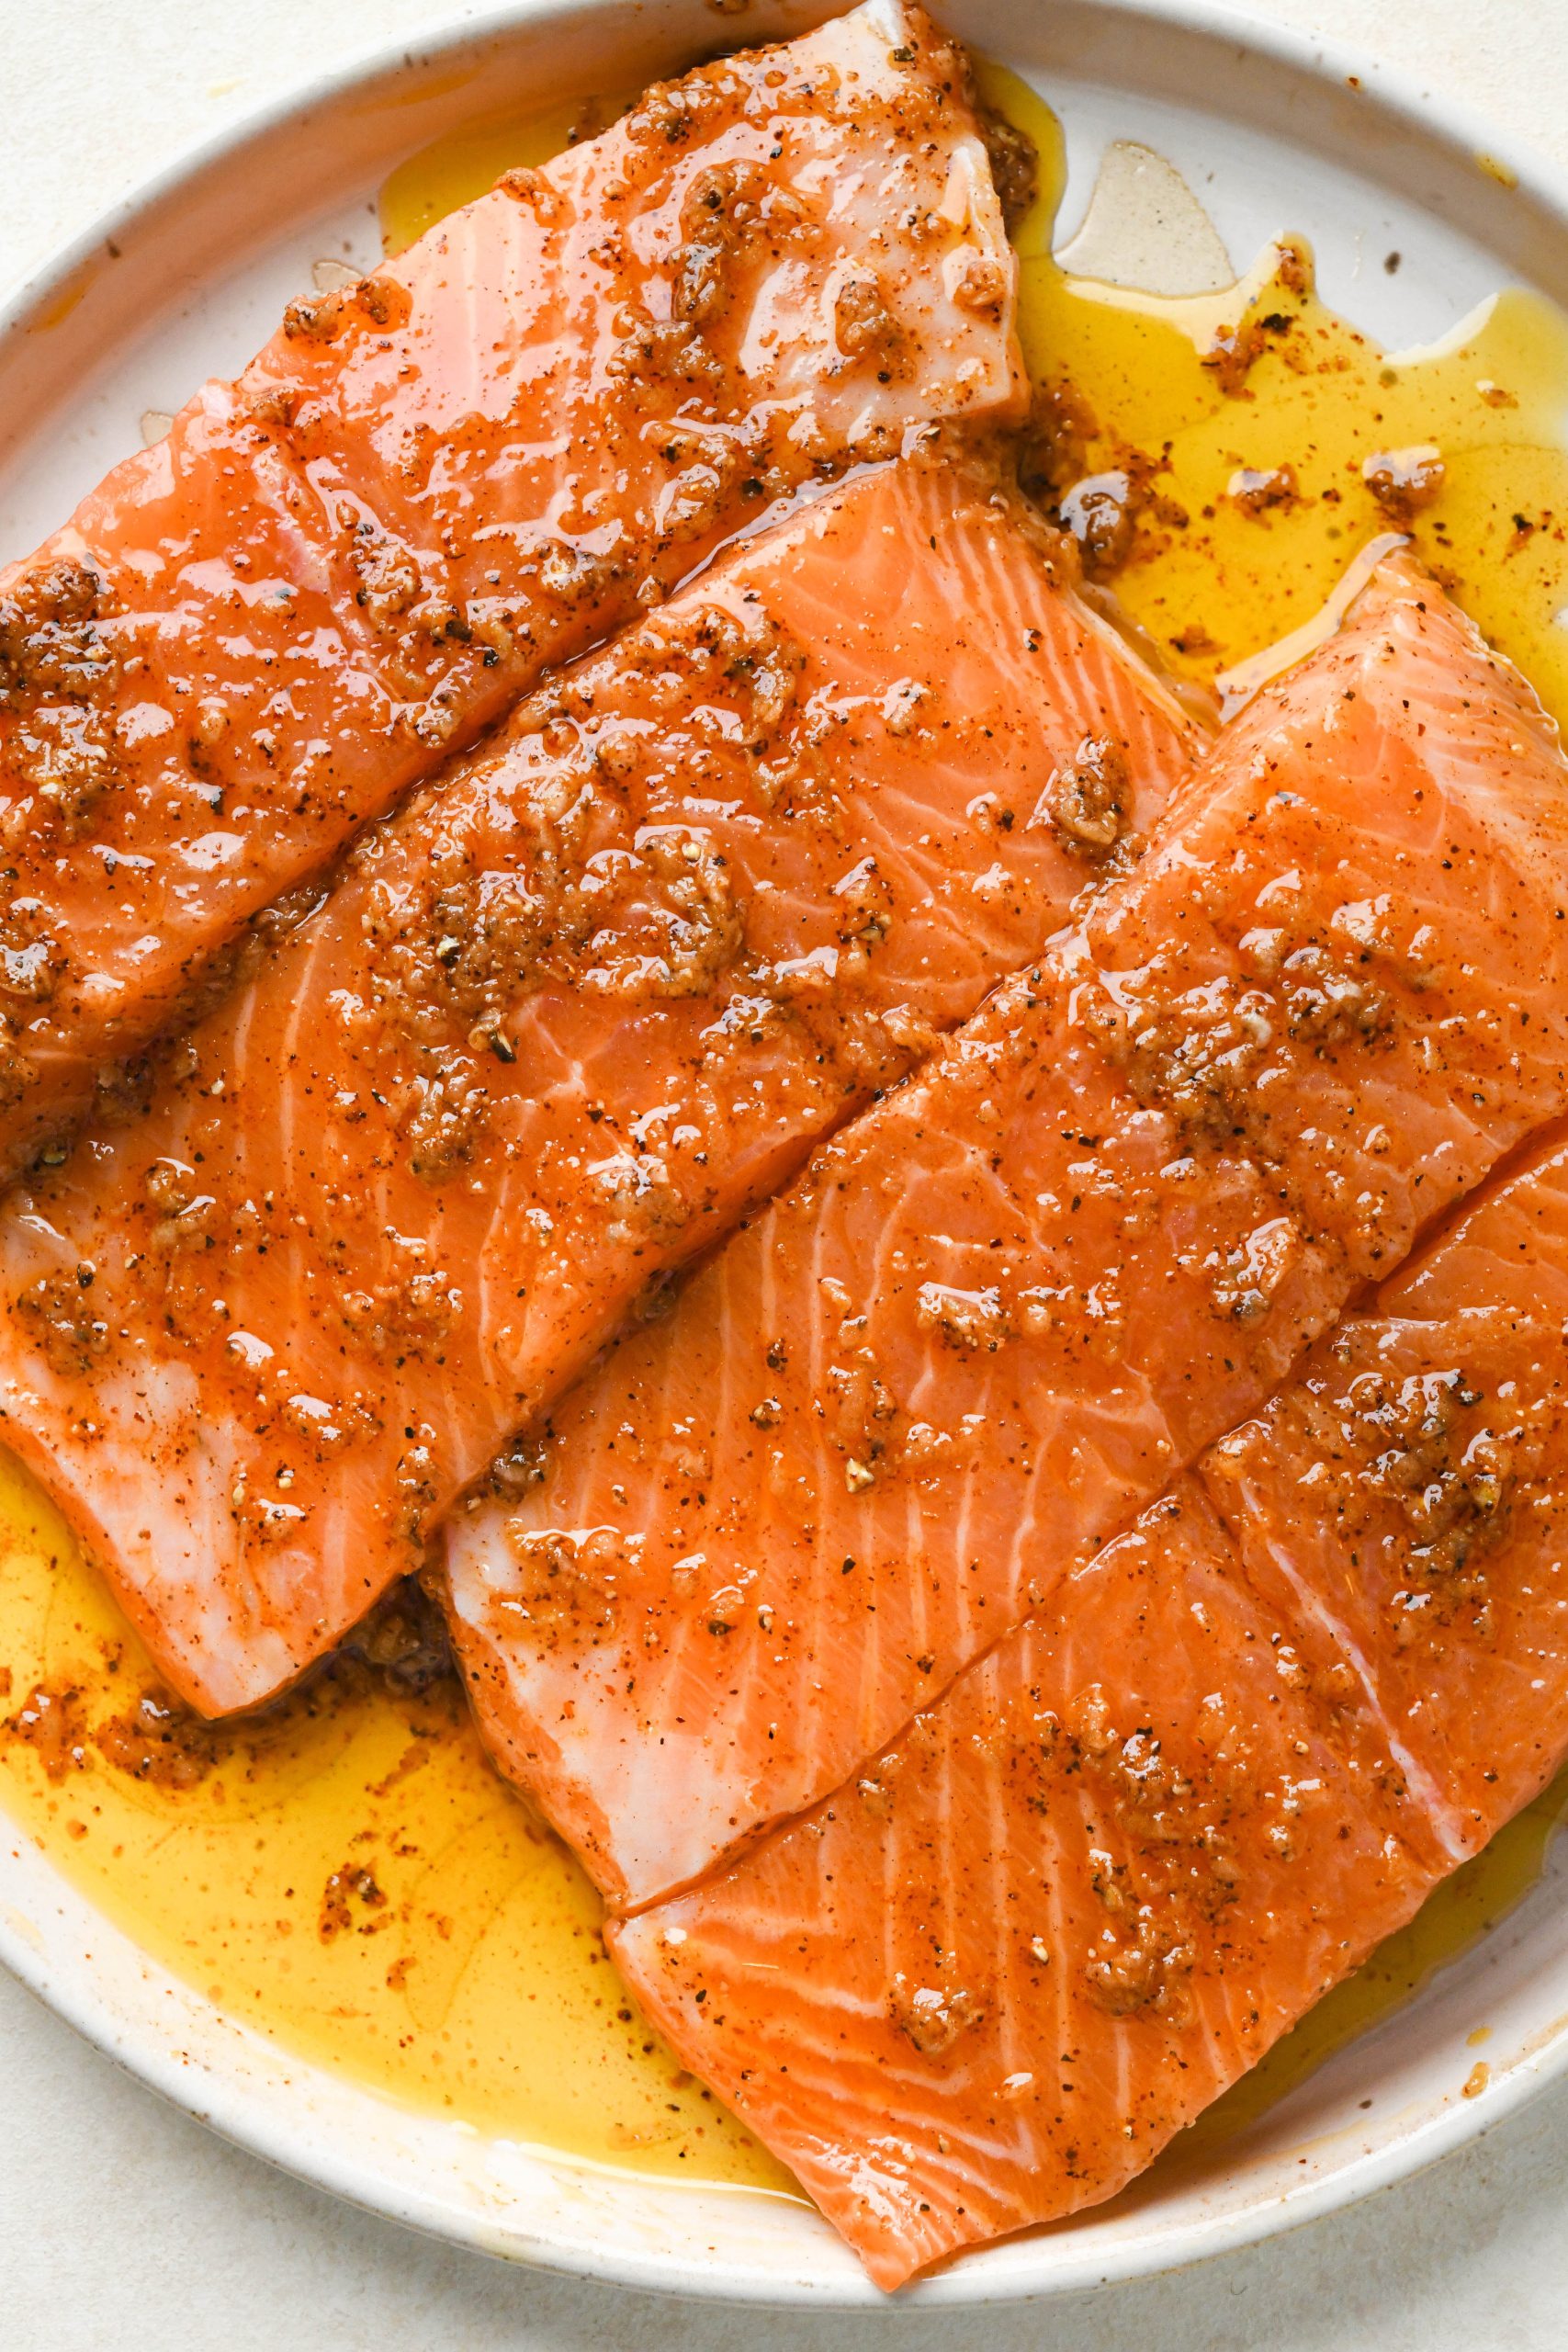 How to make baked salmon: Salmon fillets on a ceramic plate coated with avocado oil and spice mixture.